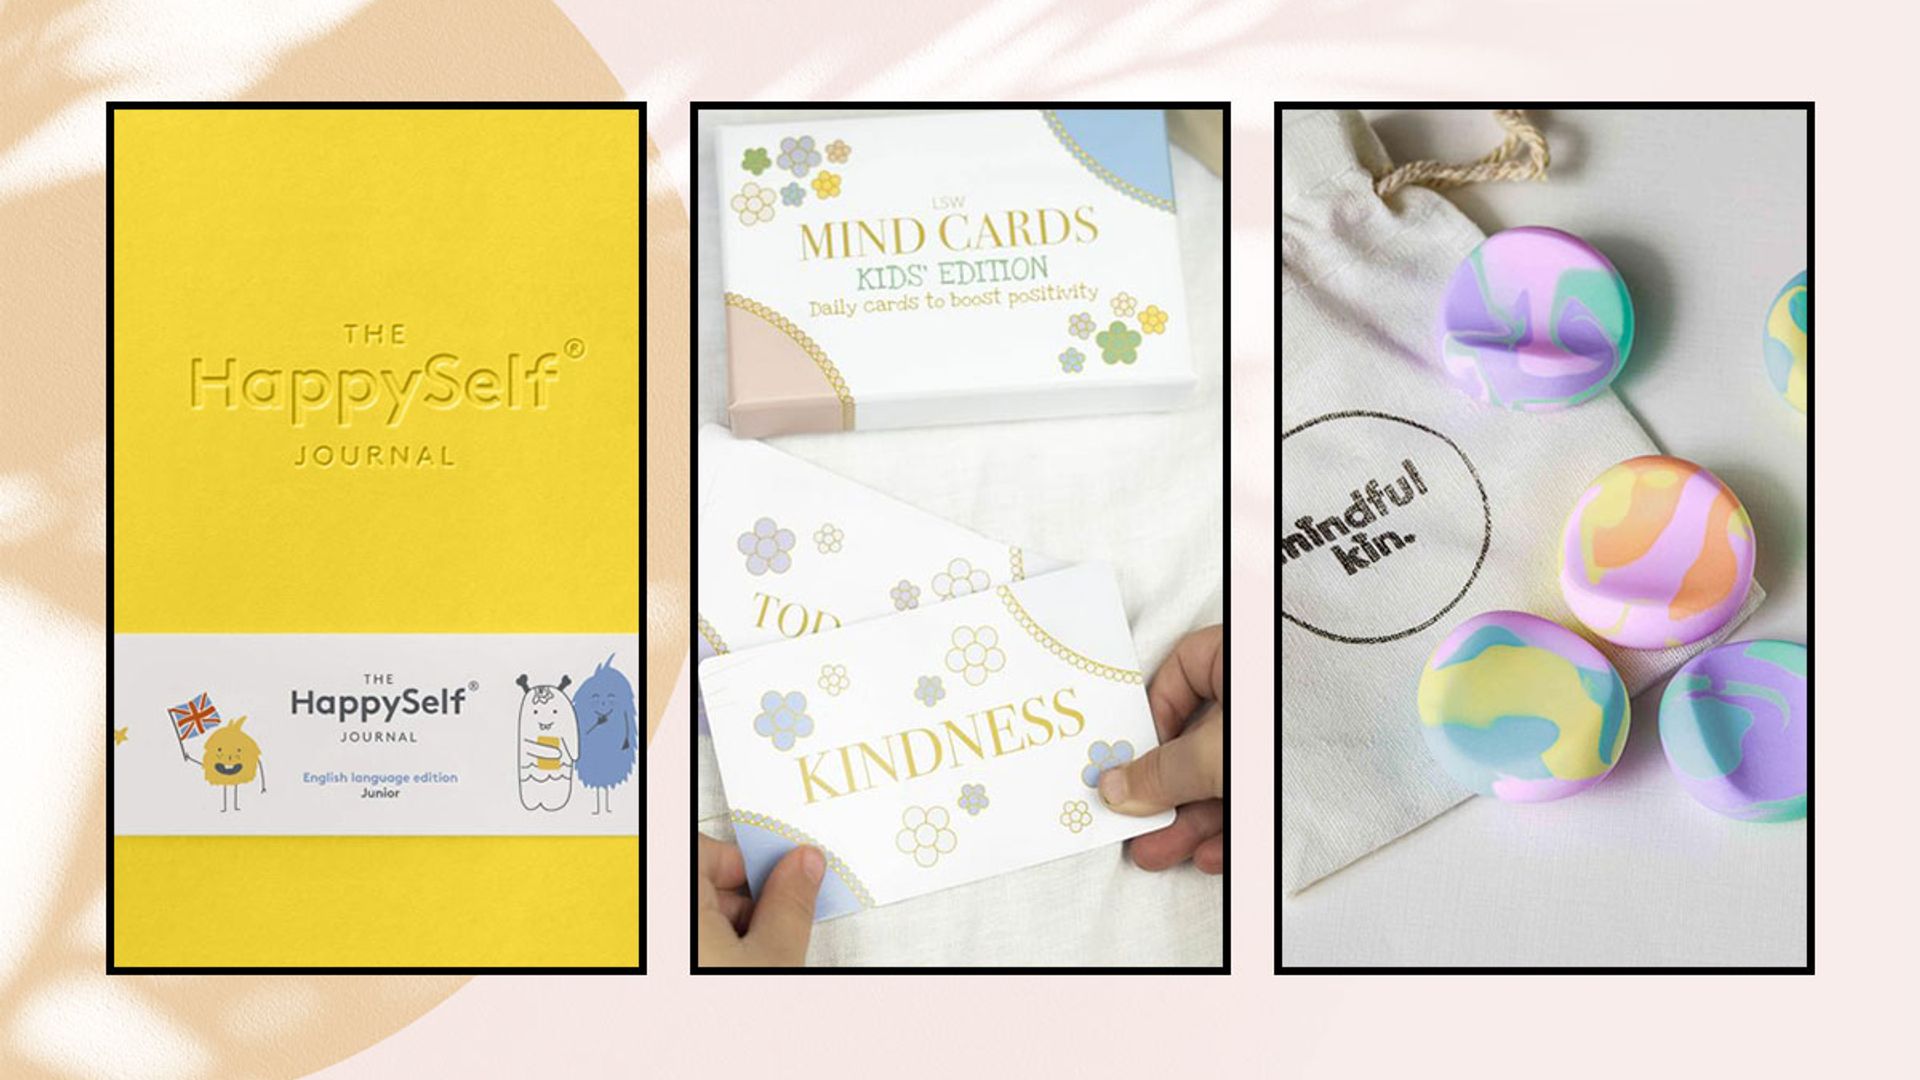 Best mindfulness gifts for children: Help relieve stress and anxiety in children